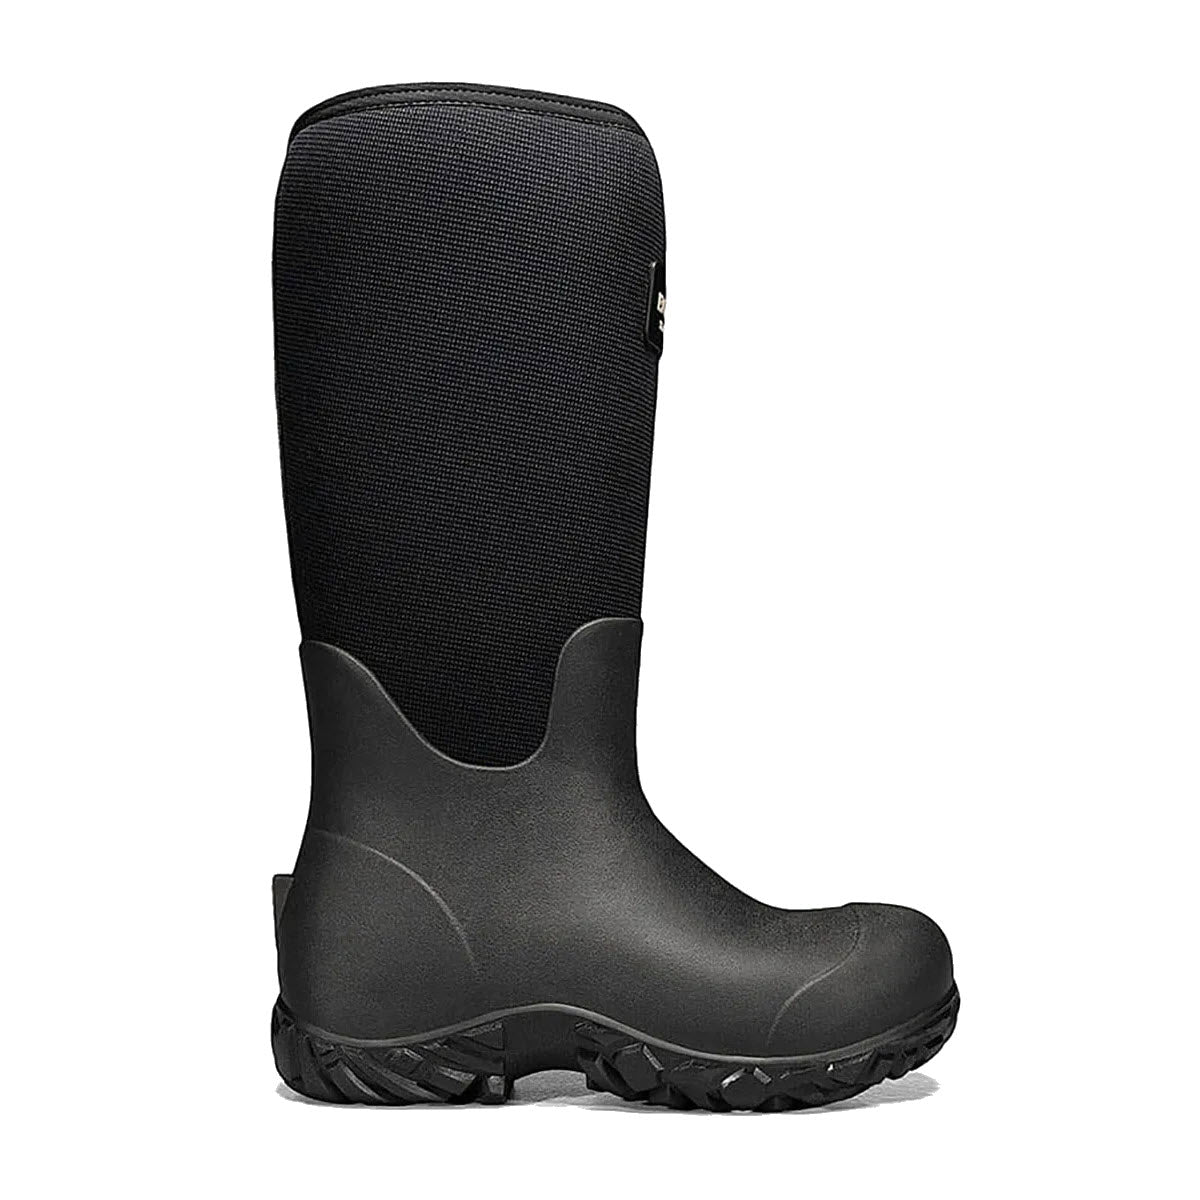 Sentence with replaced product:

Black rubber and neoprene BOGS WORKMAN 17" SOFT TOE BLACK - MENS boot on a white background, designed for durability and weather resistance, featuring a treaded sole and waterproof insulation.